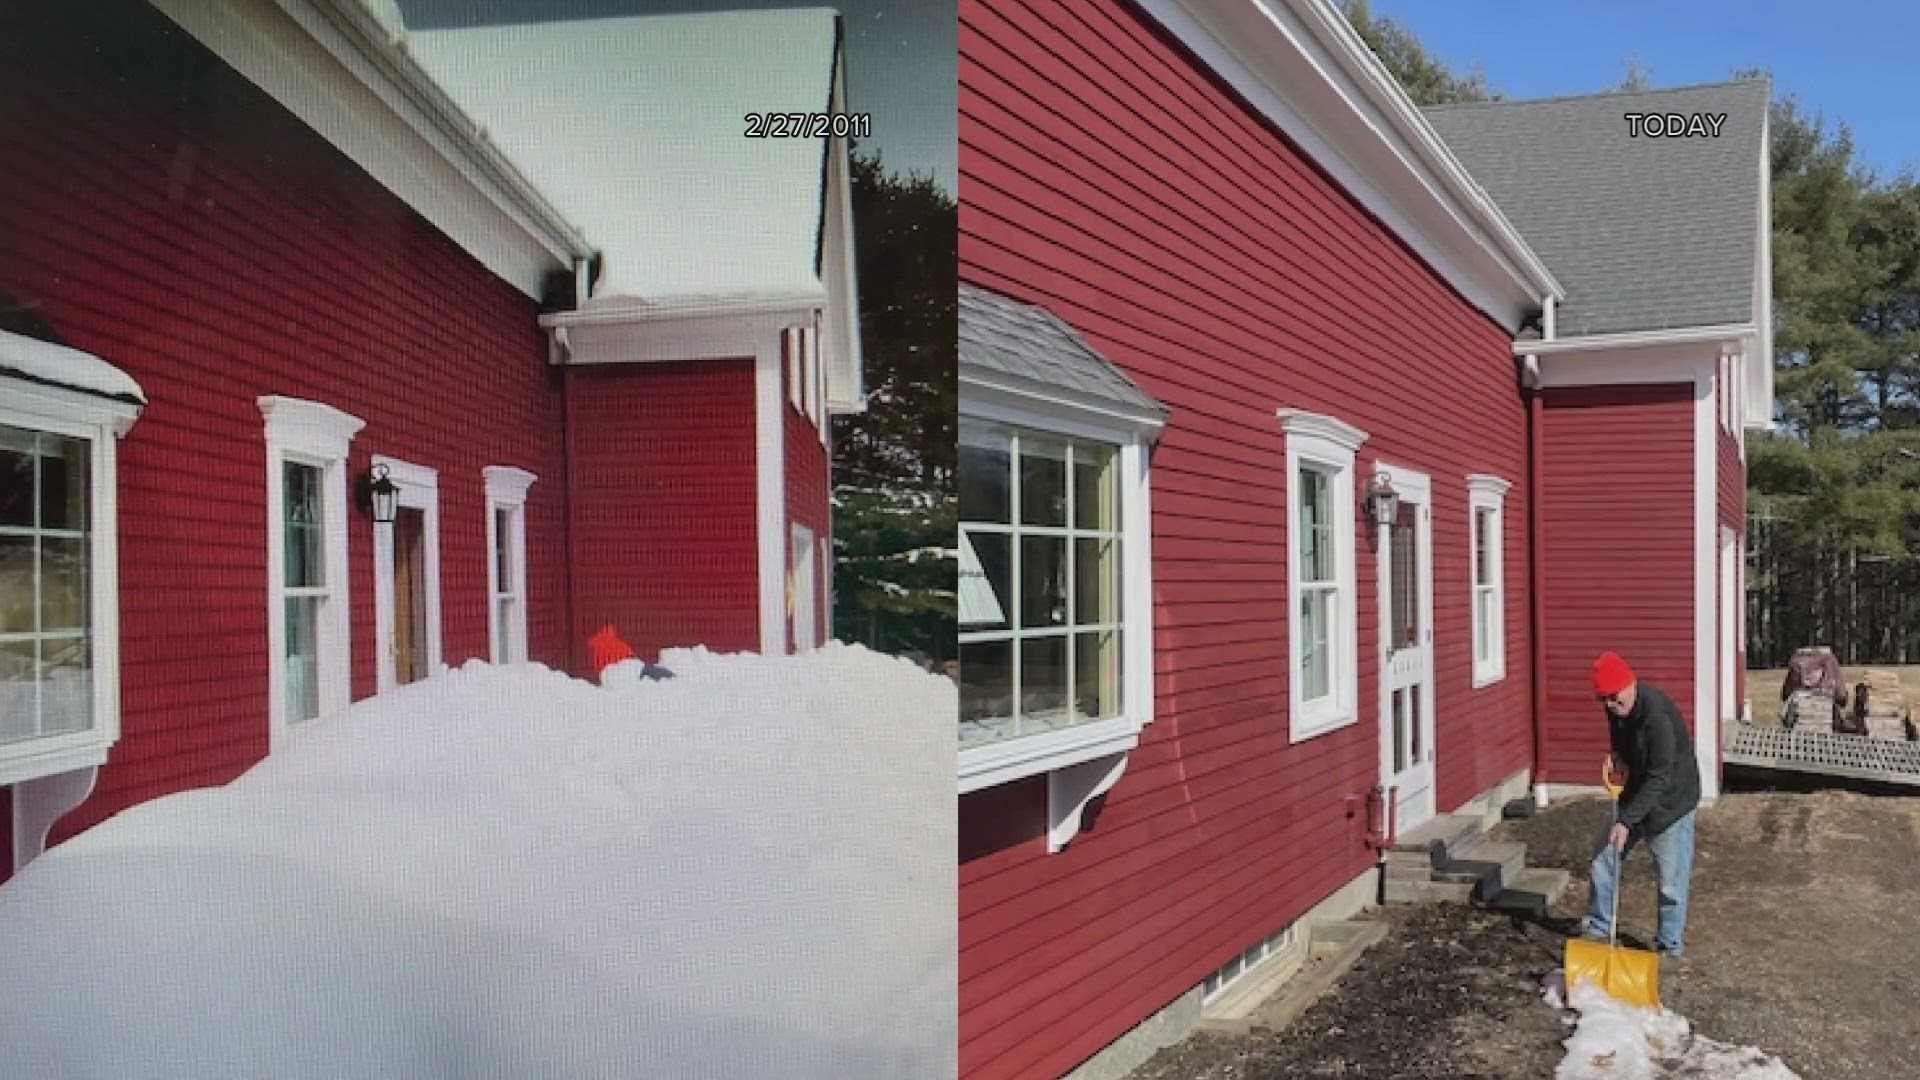 NEWS CENTER Maine viewers submitted photos of their yard from Feb. 27, 2011, and the same day in 2024. The lack of snow is a bit jarring by comparison.